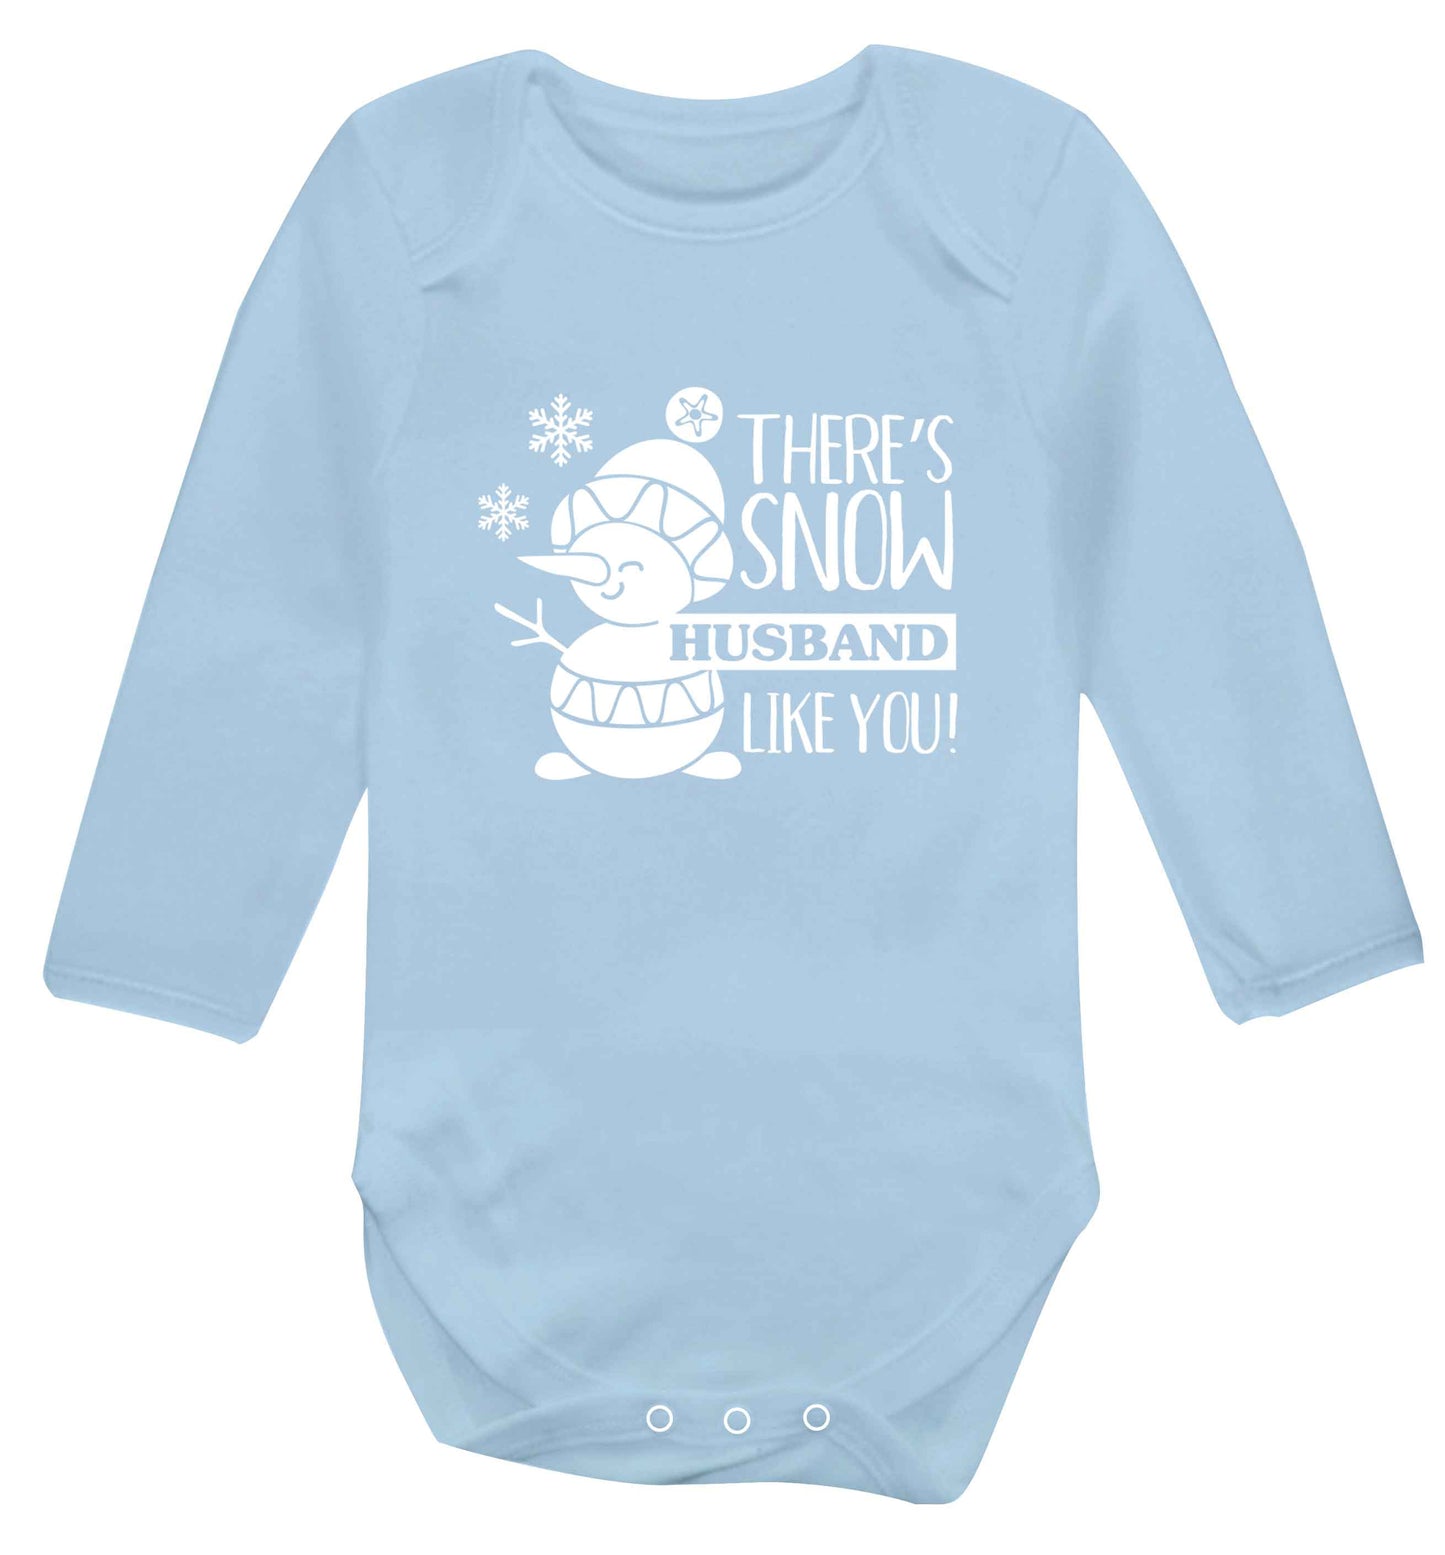 There's snow husband like you baby vest long sleeved pale blue 6-12 months